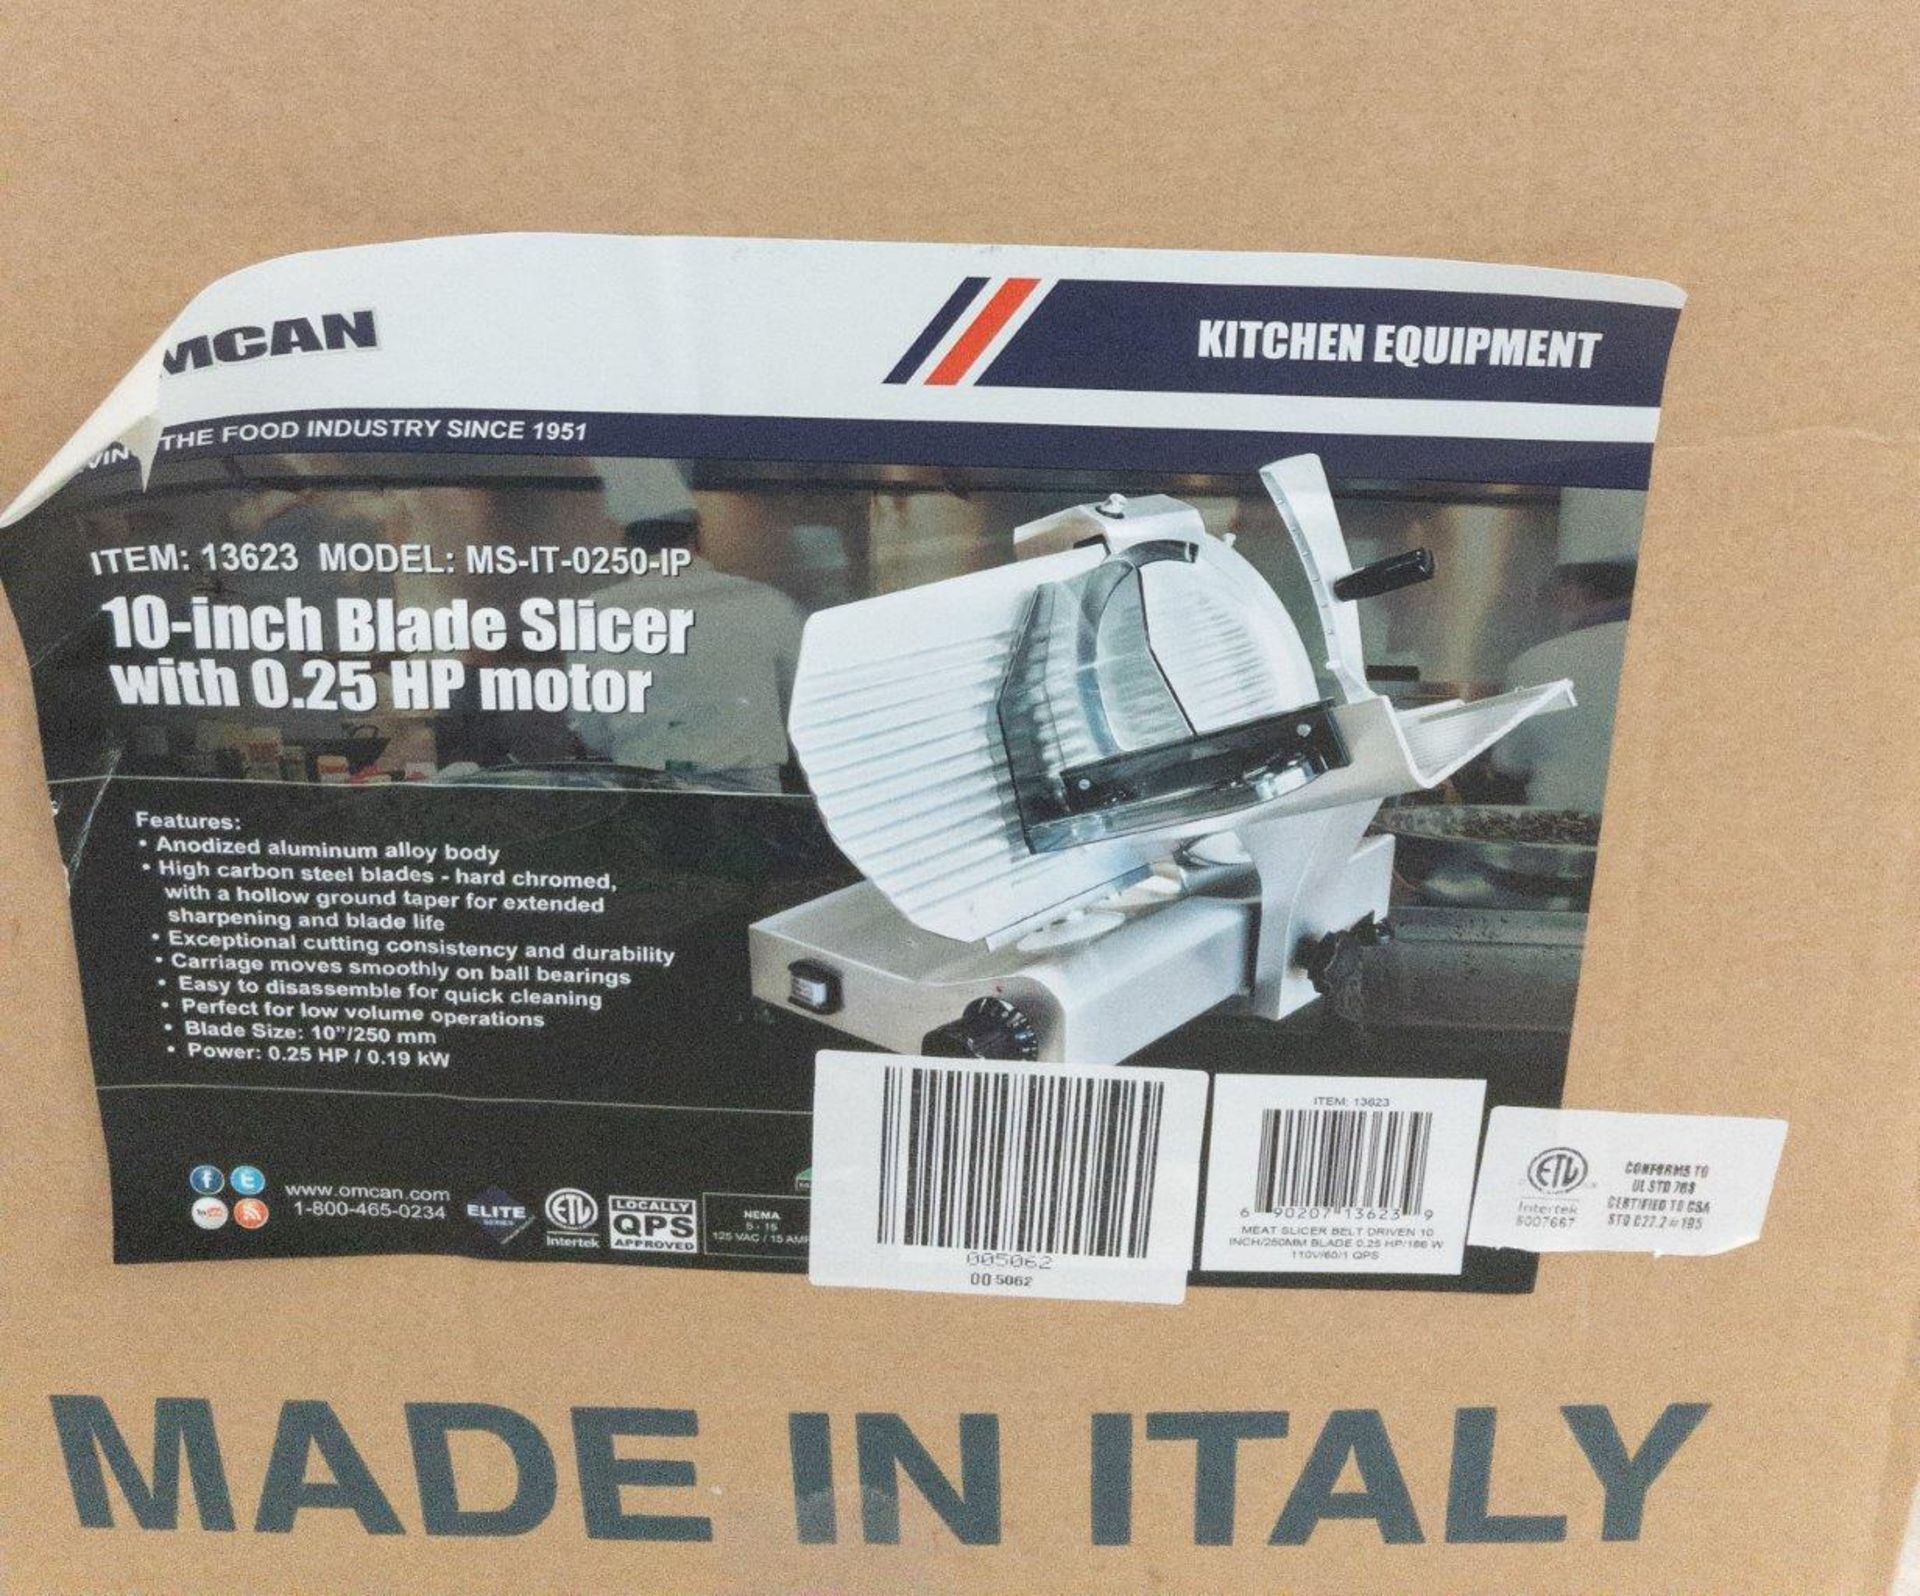 10" BLADE SLICER WITH COMPACT BODY WITH 0.25 HP MOTOR - MADE IN ITALY, OMCAN 13623 - Image 9 of 9